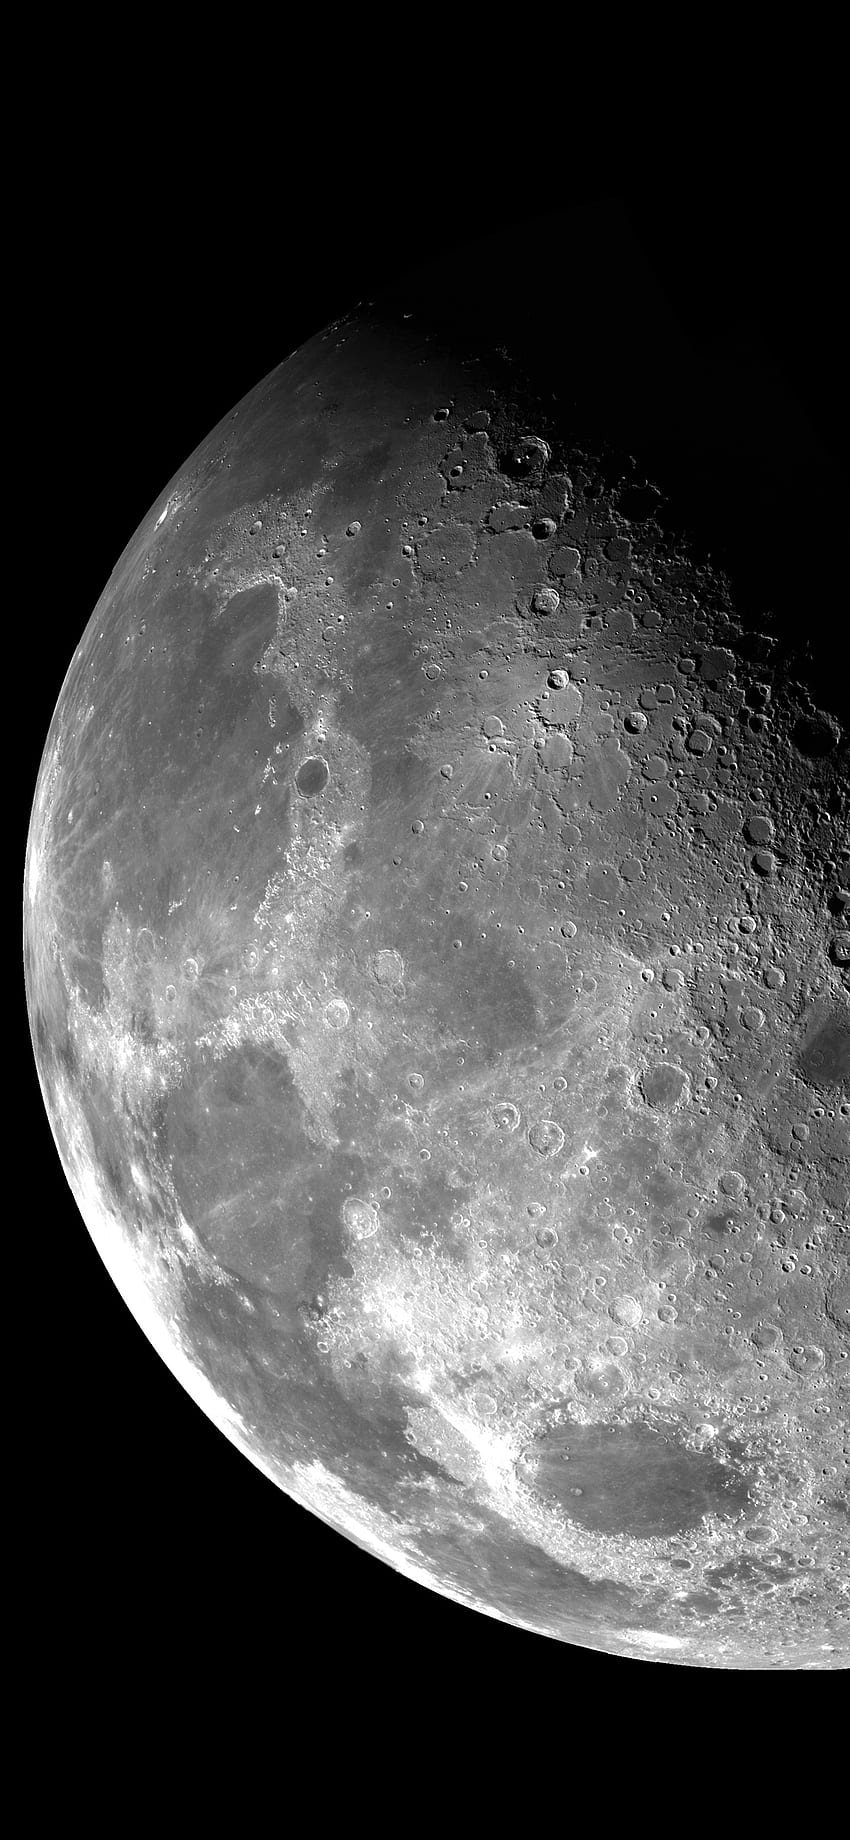 Moon for iPhone 11, Pro Max, X, 8, 7, 6 - on 3, 12 Moon HD phone wallpaper